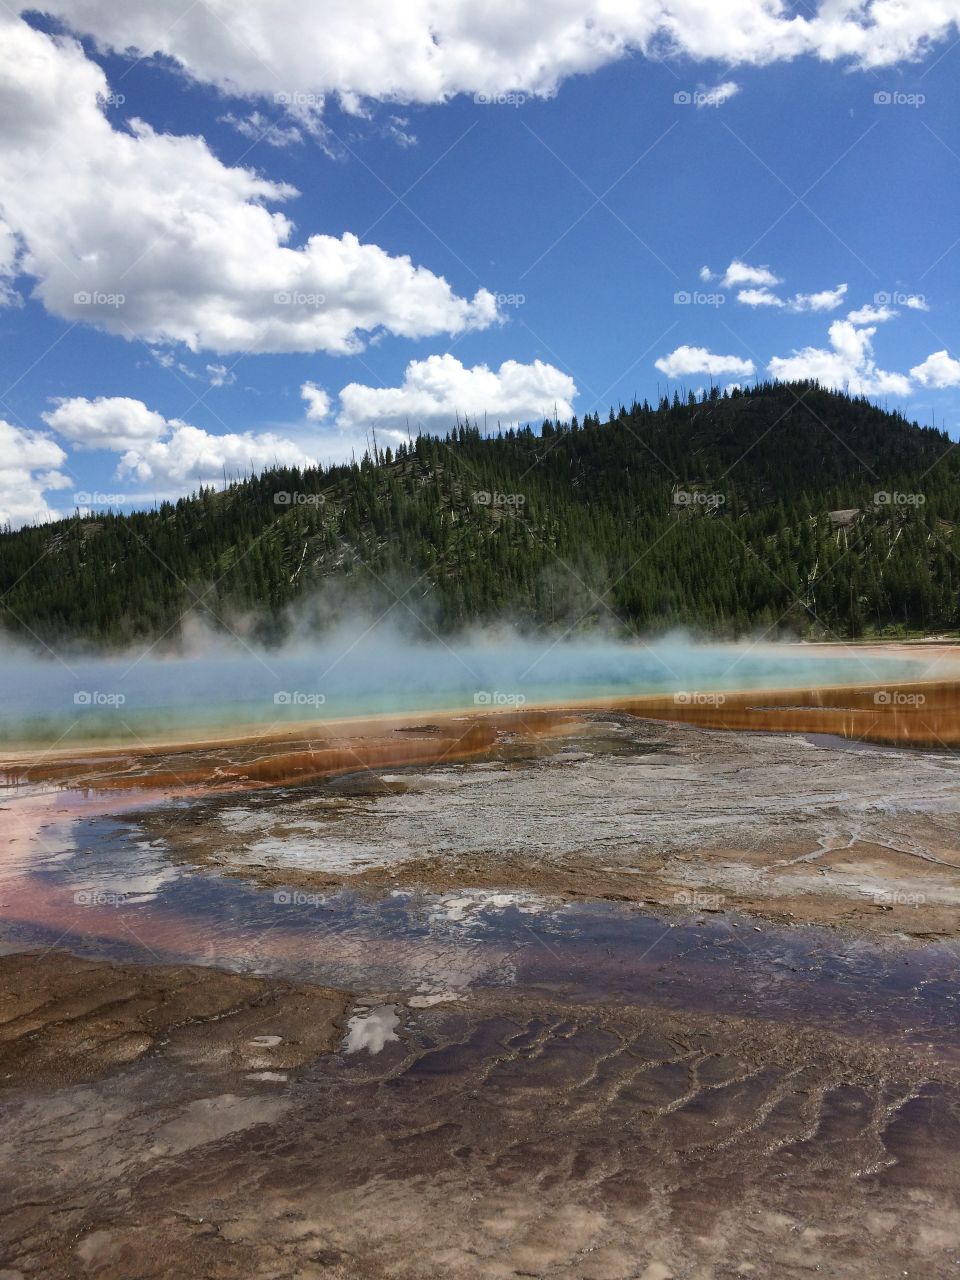 Grand Prismatic Spring at Yellowstone National Park in the summer of 2016.